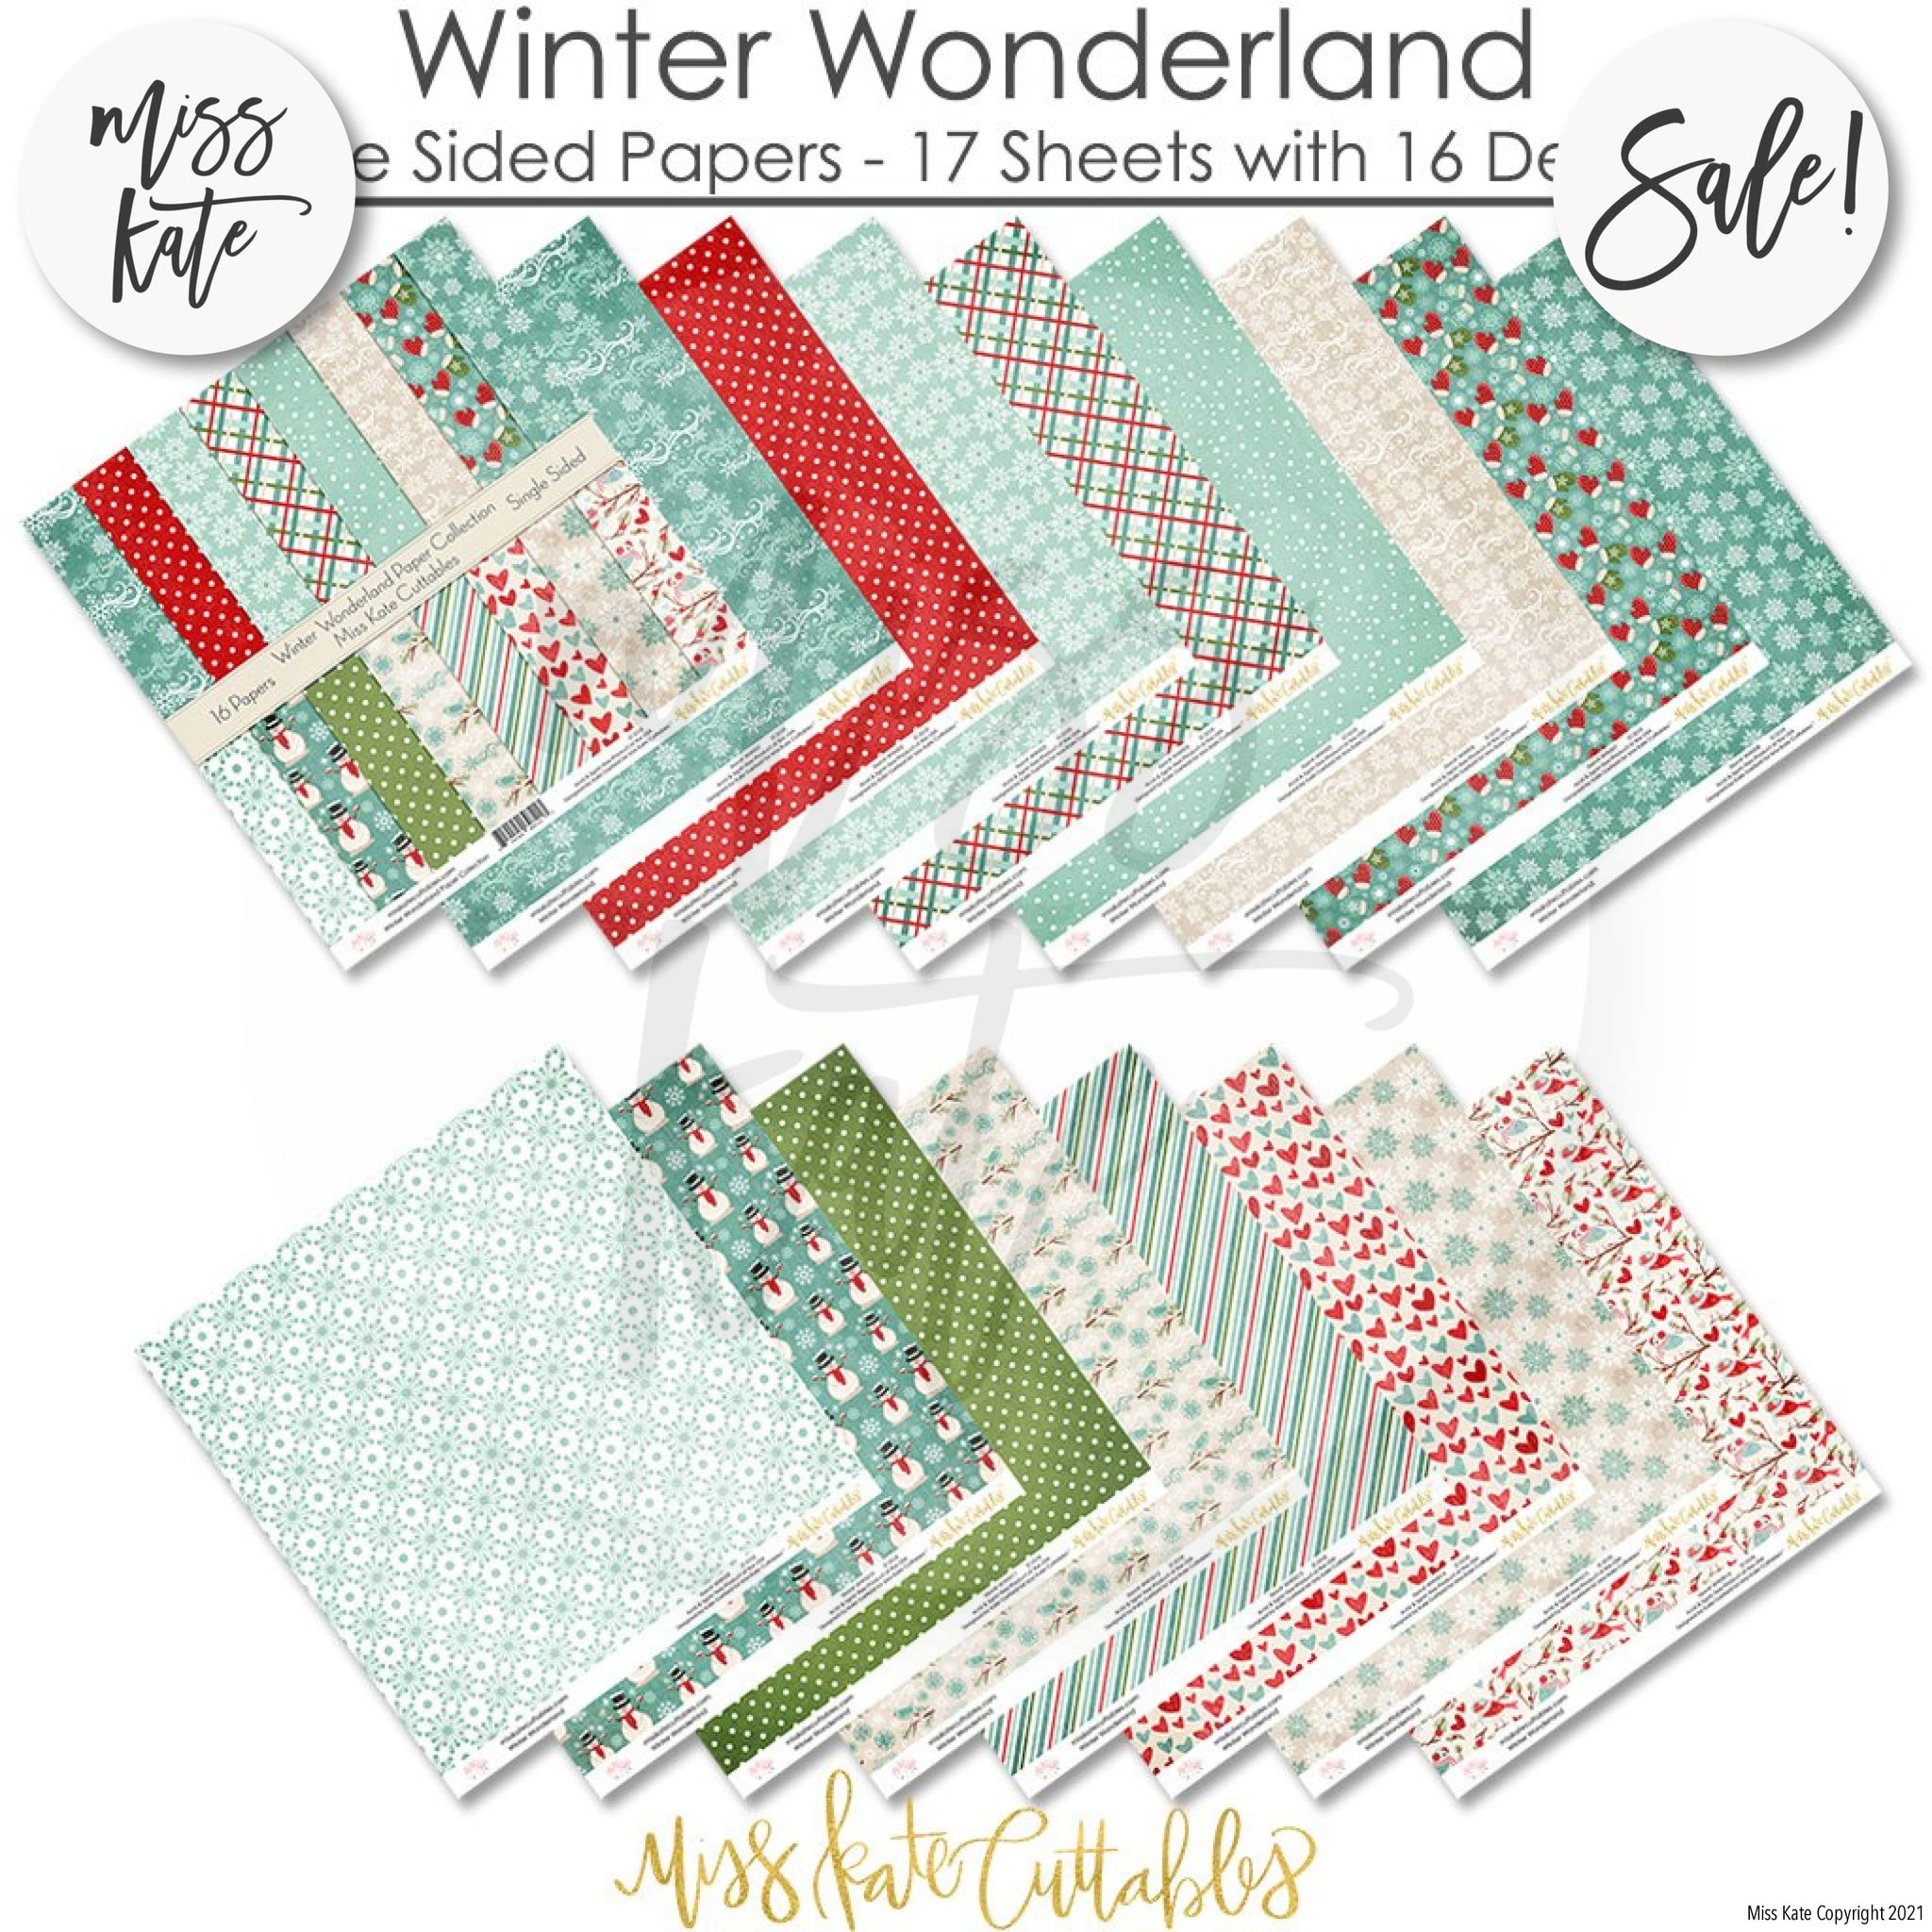 Cold Days - For Winter - Sticker Sheet Stickers Christmas, Scrapbook – MISS  KATE